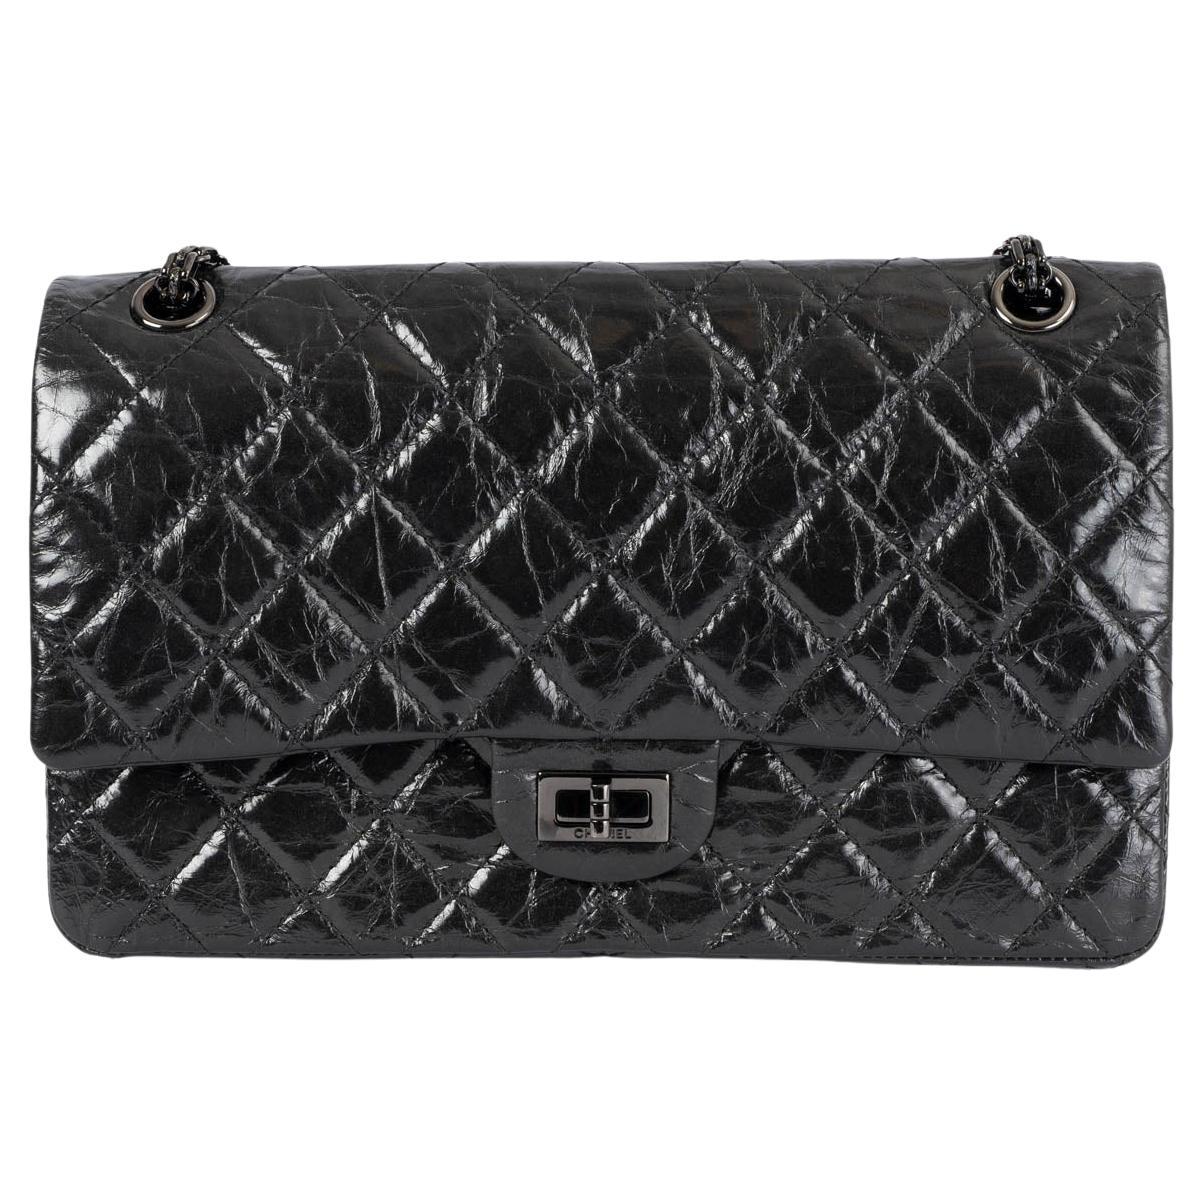 CHANEL 50TH ANNIVERSARY 2.55 REISSUE DOUBLE FLAP BAG FINAL PRICE